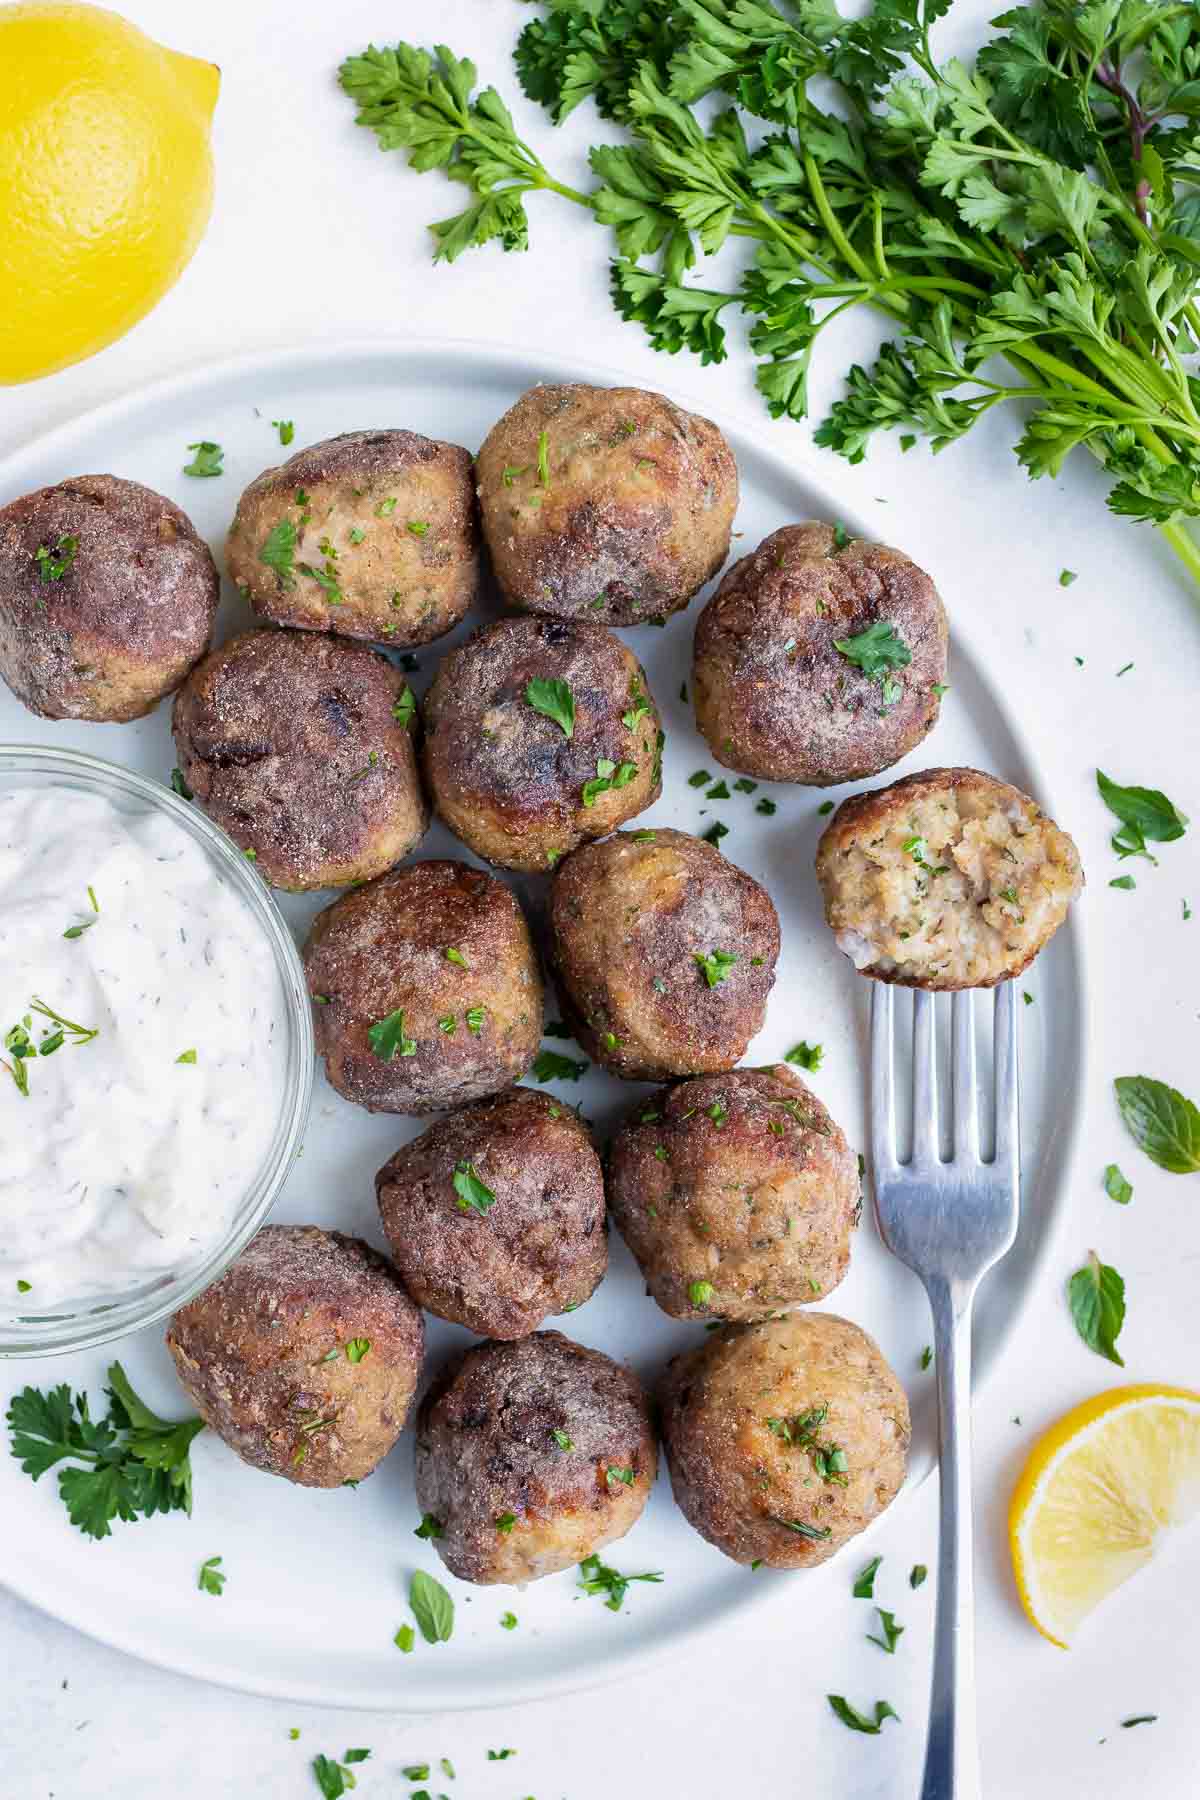 Greek Turkey Meatballs are placed on a plate with a Tzatziki dipping sauce.